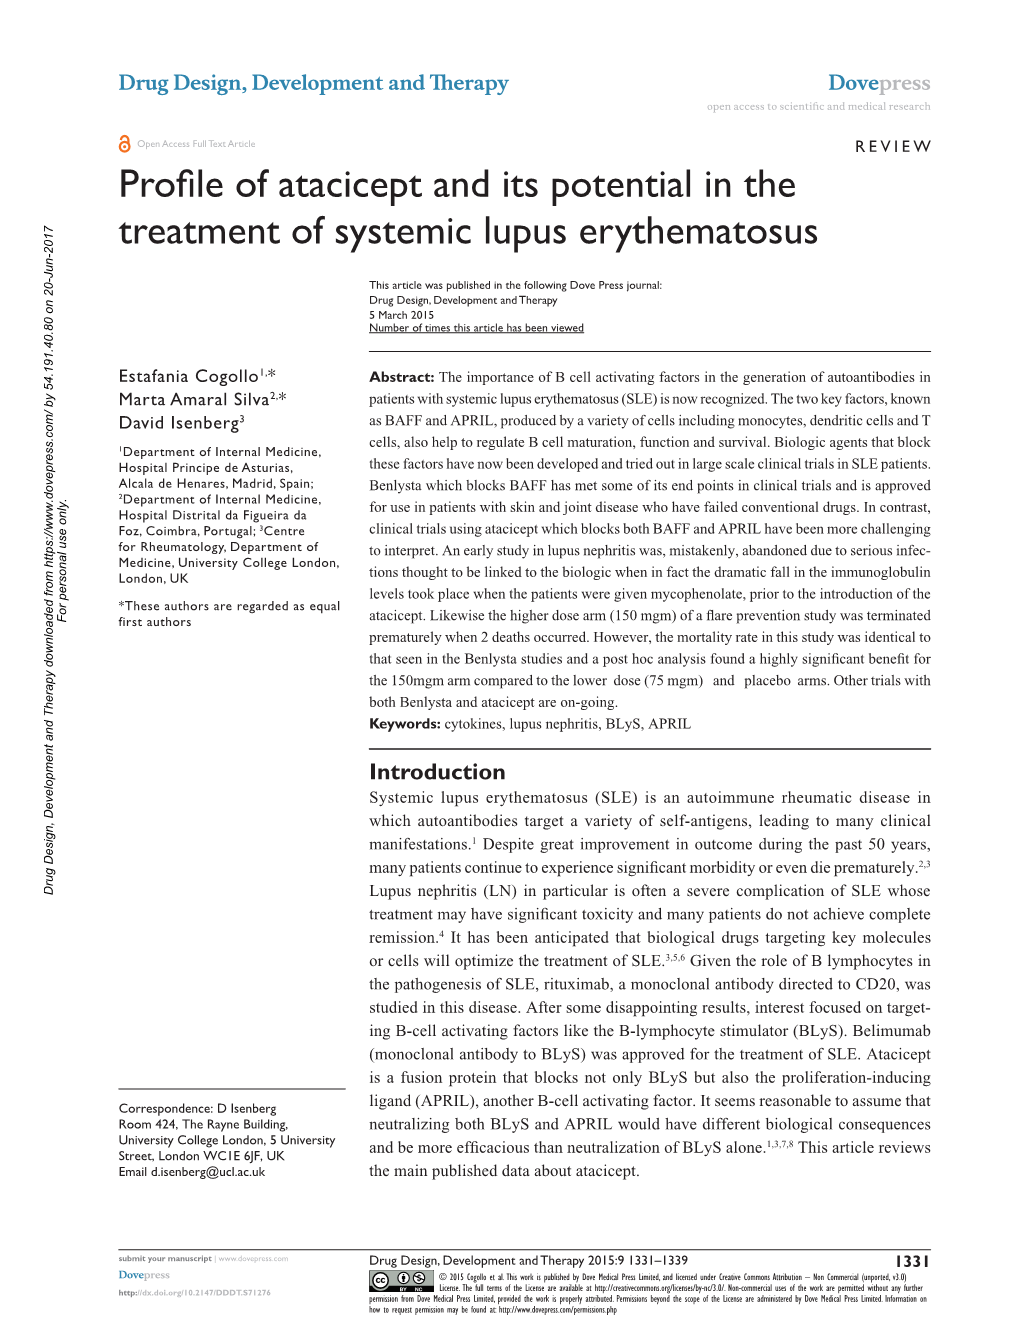 Profile of Atacicept and Its Potential in the Treatment of Systemic Lupus Erythematosus